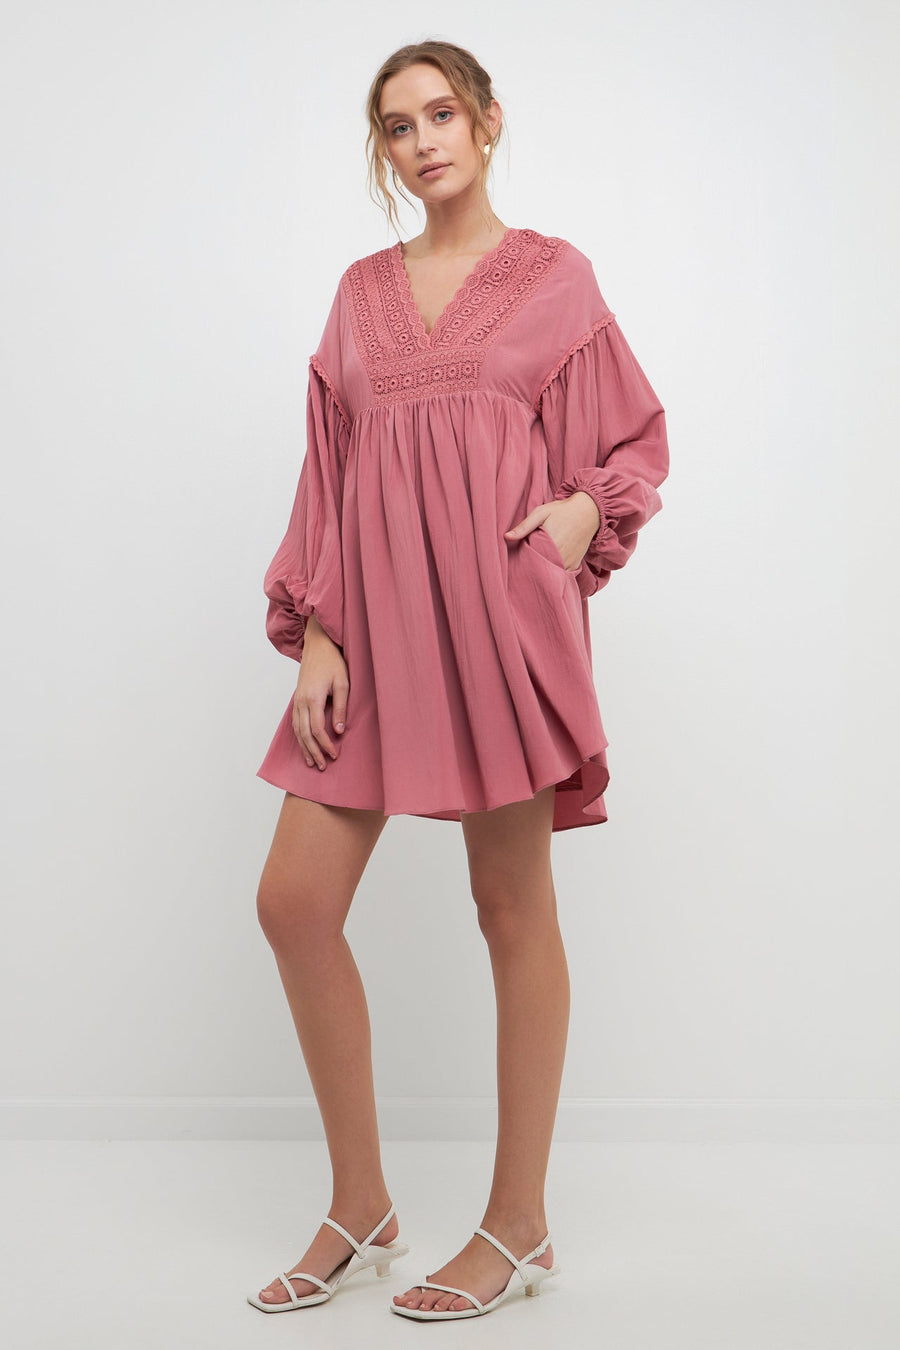 FREE THE ROSES-Laced Blouson Sleeve Shift Dress-DRESSES available at Objectrare